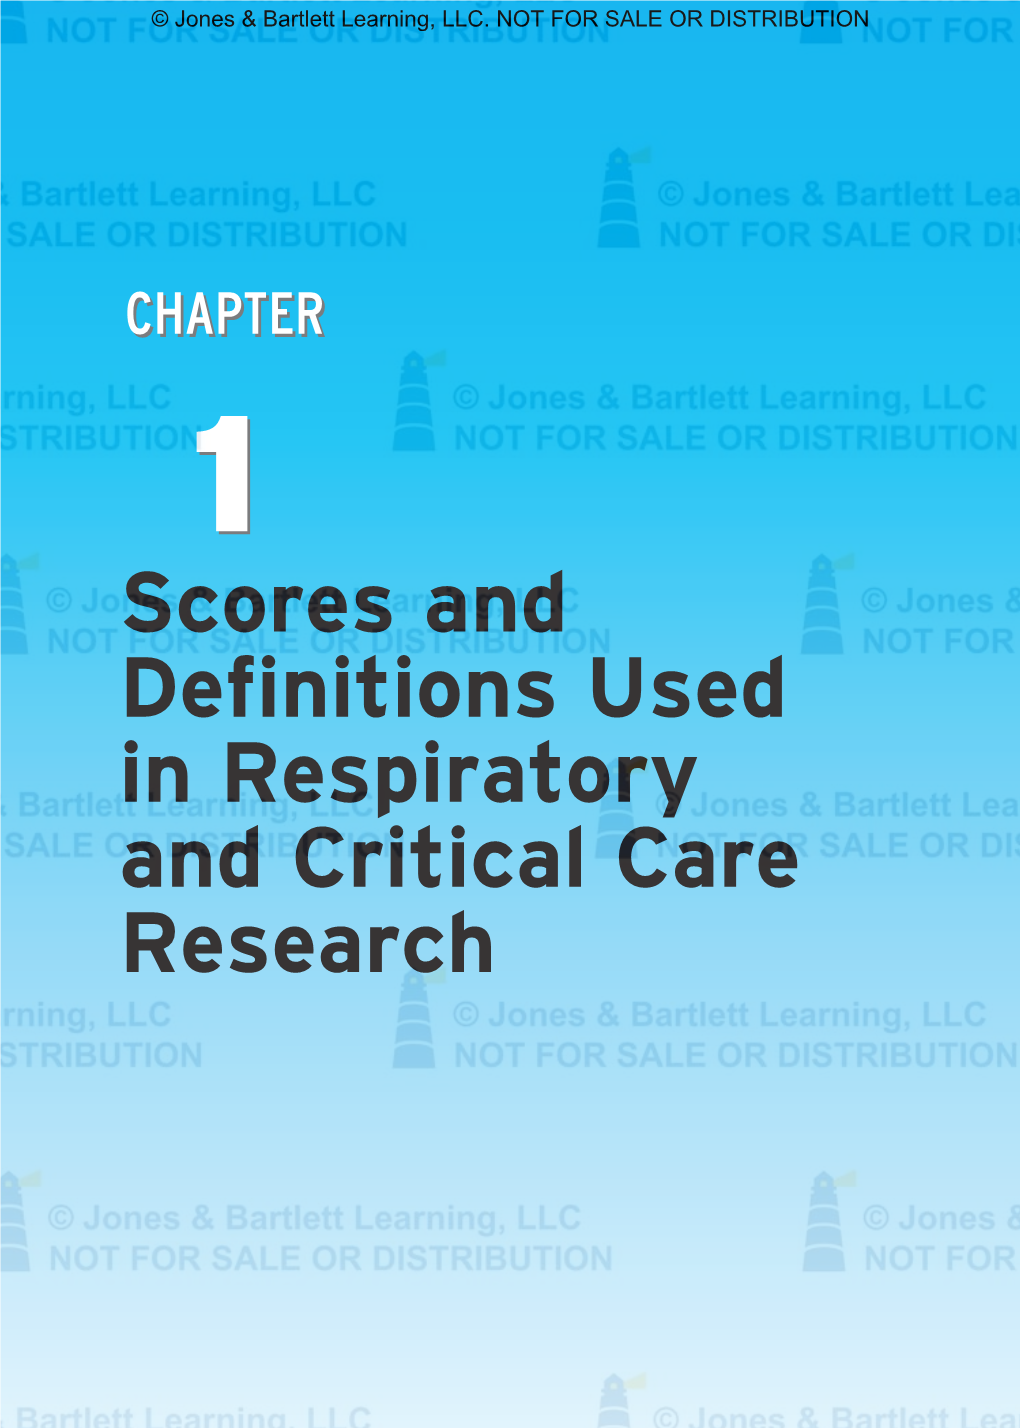 Scores and Definitions Used in Respiratory and Critical Care Research